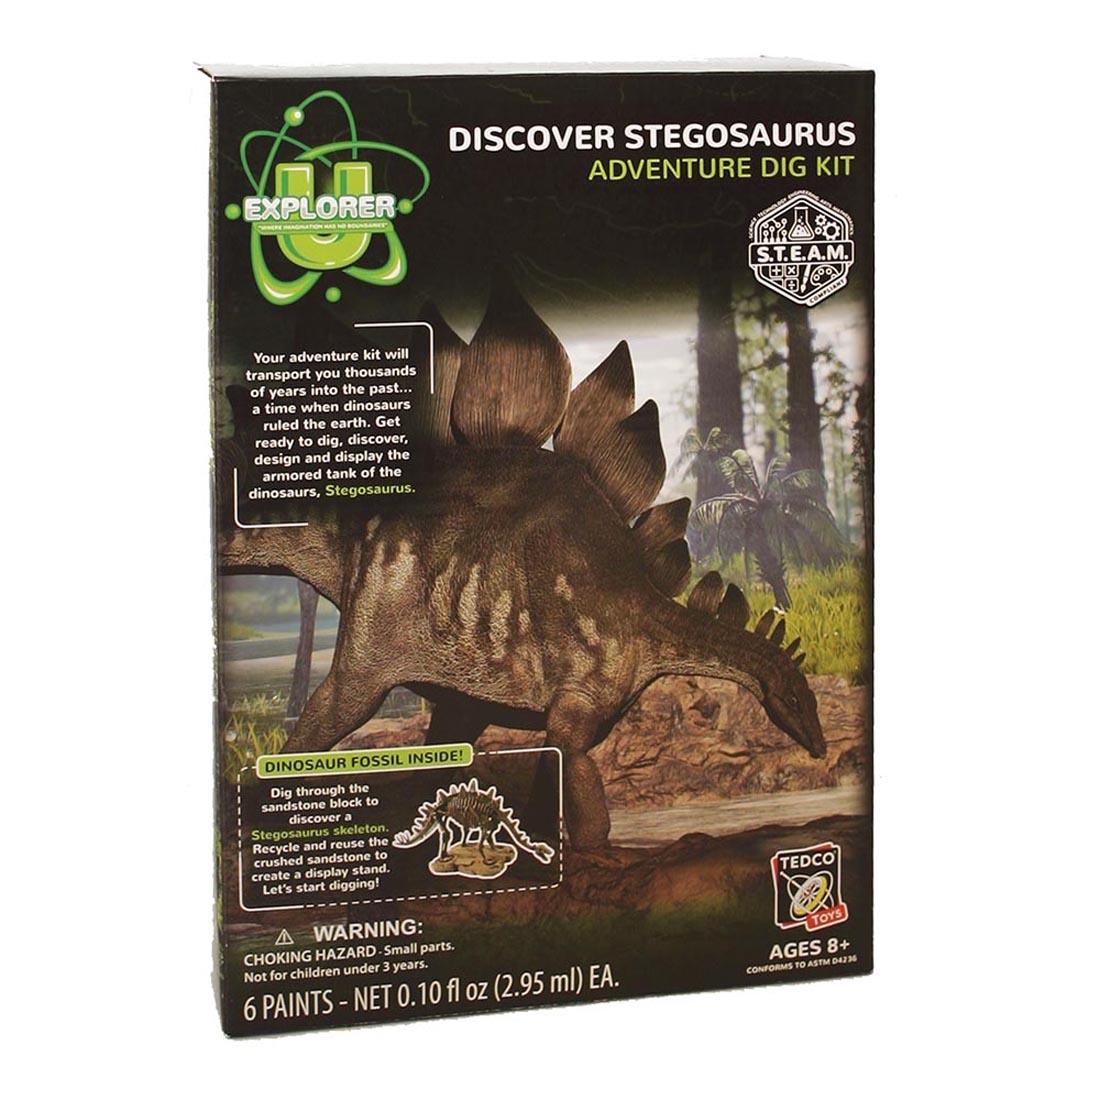 Discover Stegosaurus Adventure Dig Kit by Tedco